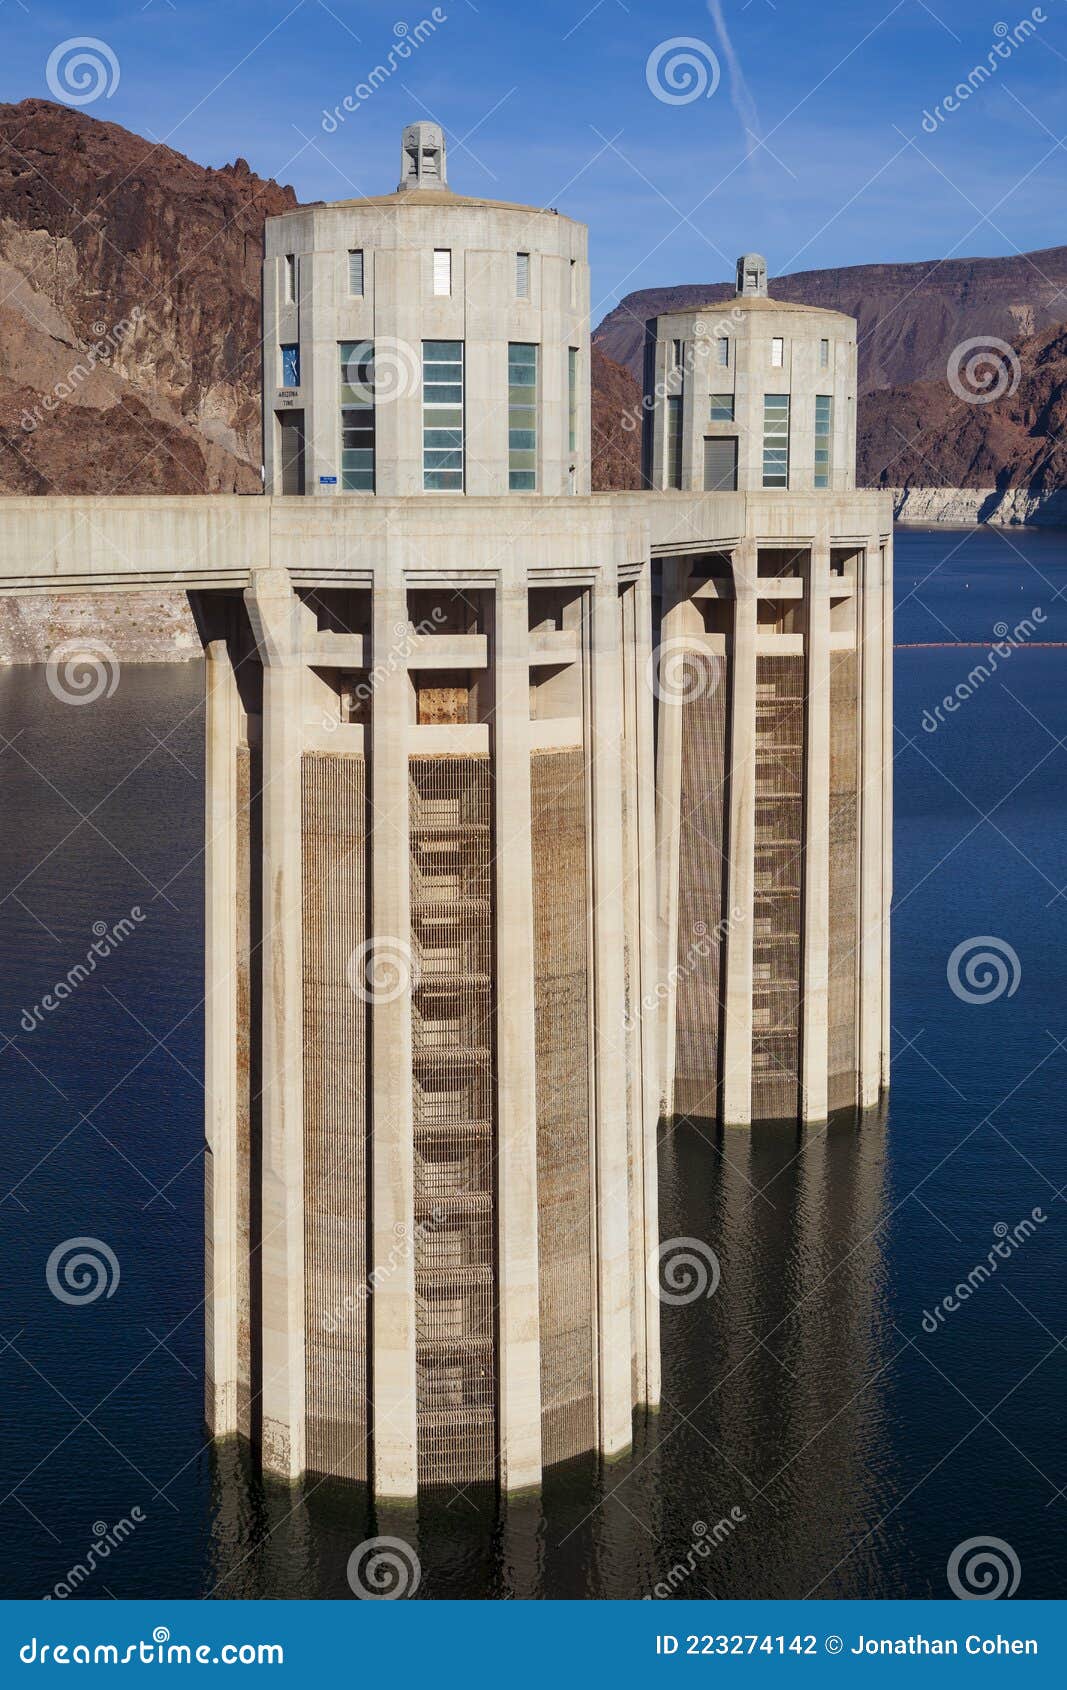 hoover dam reservoir at record low water levels, raising concerns about hydroelectric power